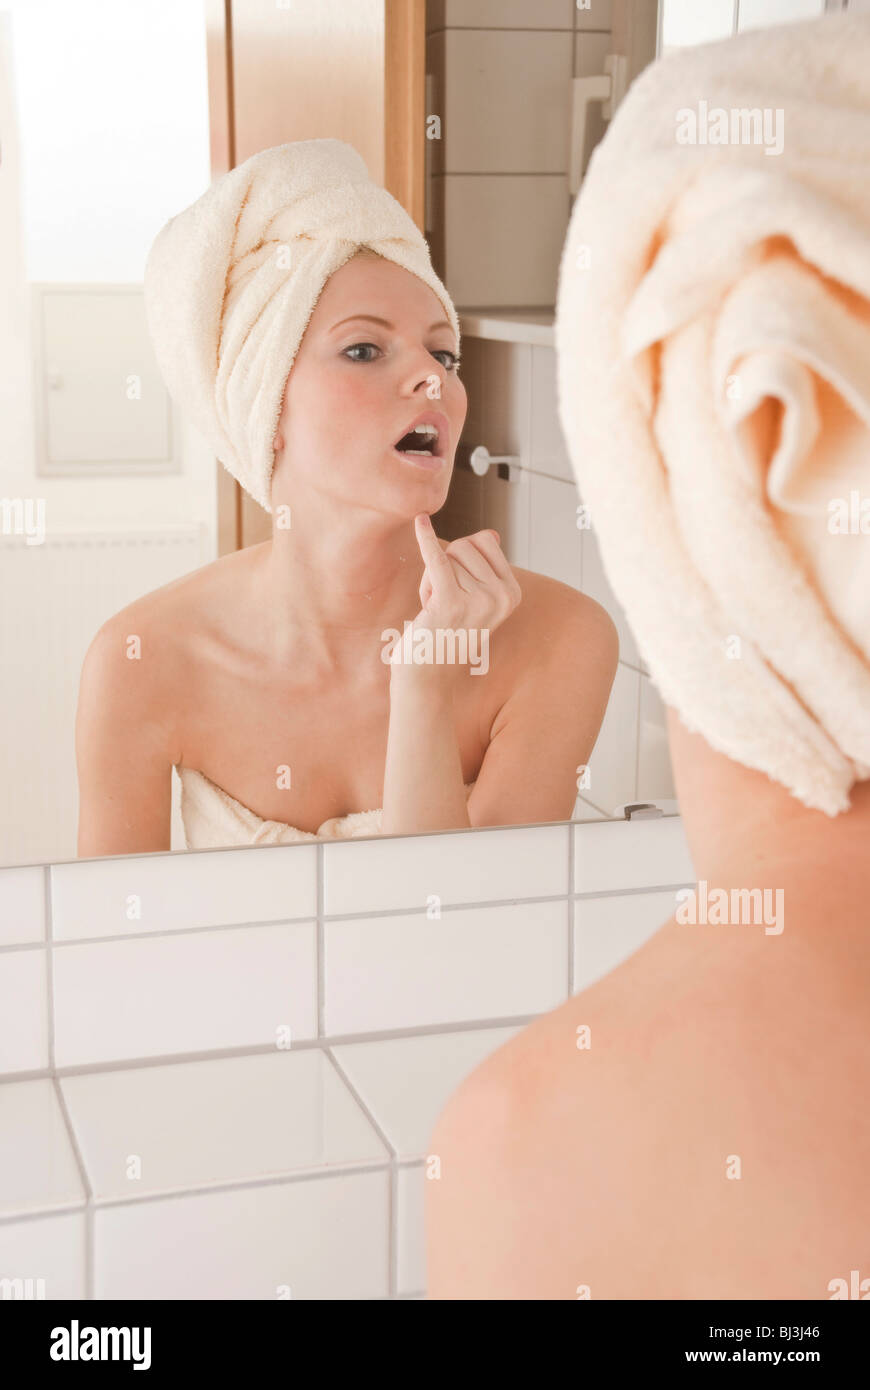 Young woman with a towel wrapped around her head in front of a mirror Stock Photo